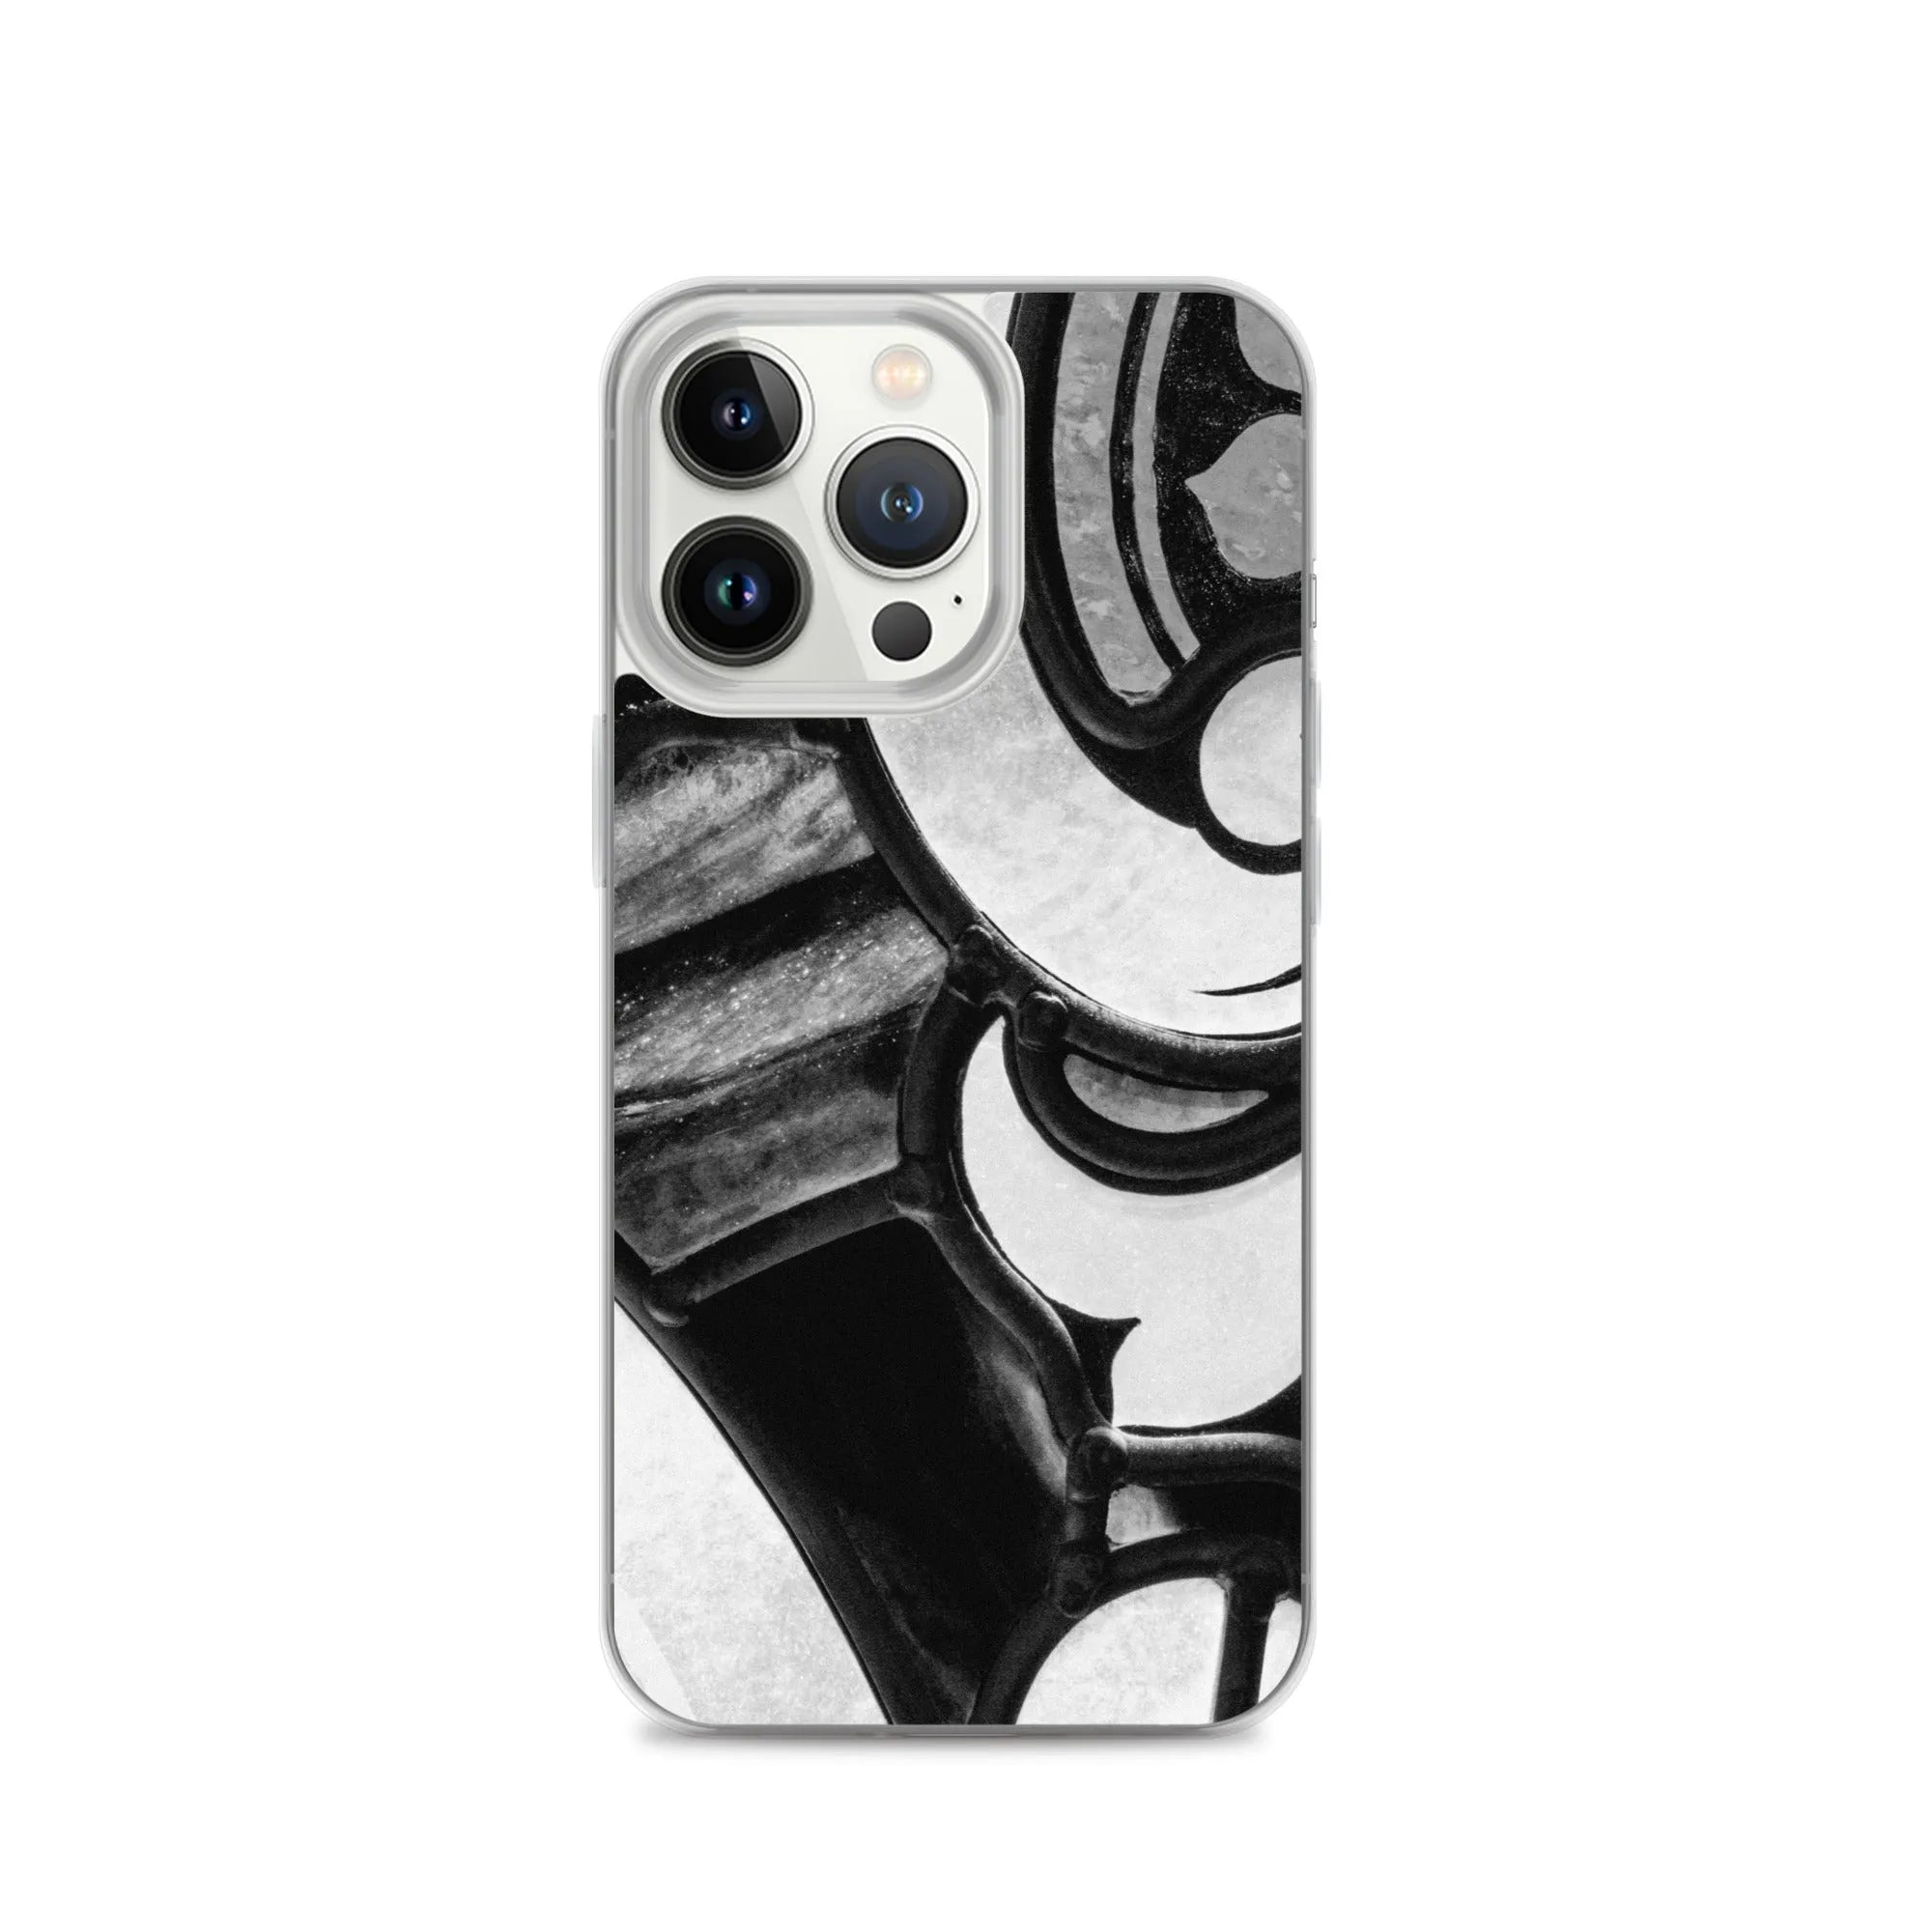 Stay Glassy - Designer Travels Art Iphone Case - Black And White - Iphone 13 Pro - Mobile Phone Cases - Aesthetic Art